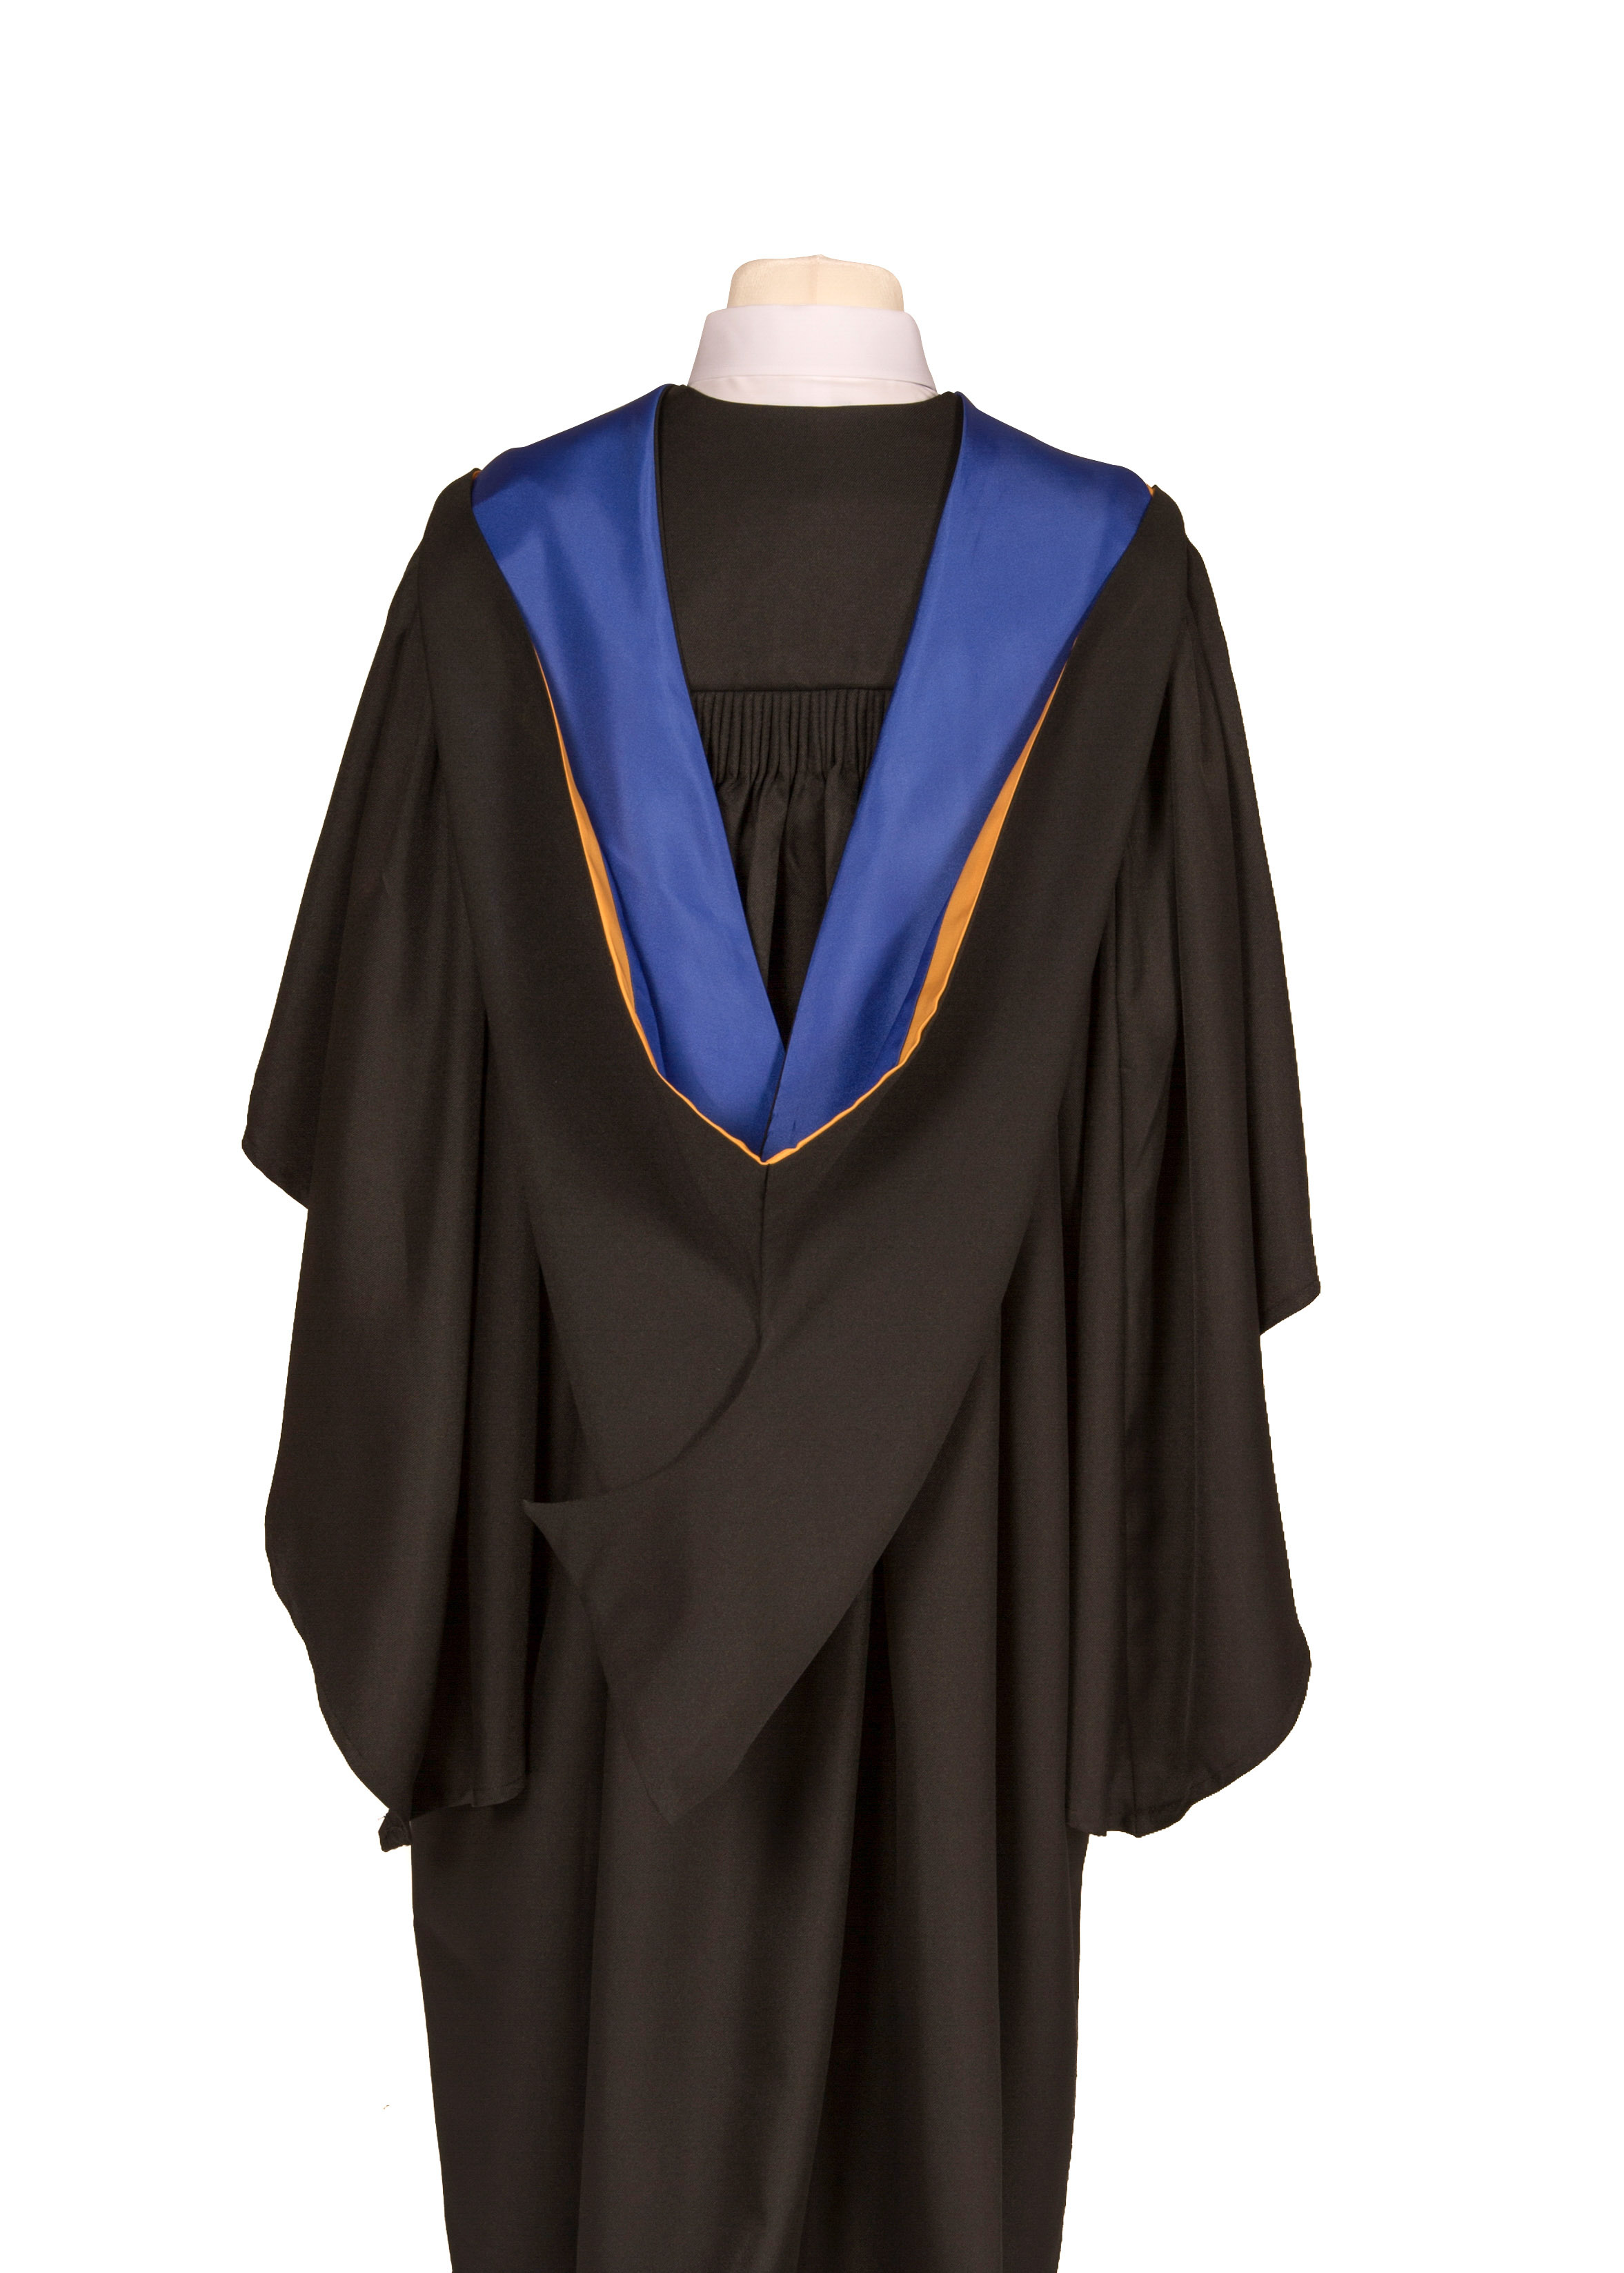 Premium Doctoral Gowns, Hoods, and Tams for Graduation – CAPGOWN